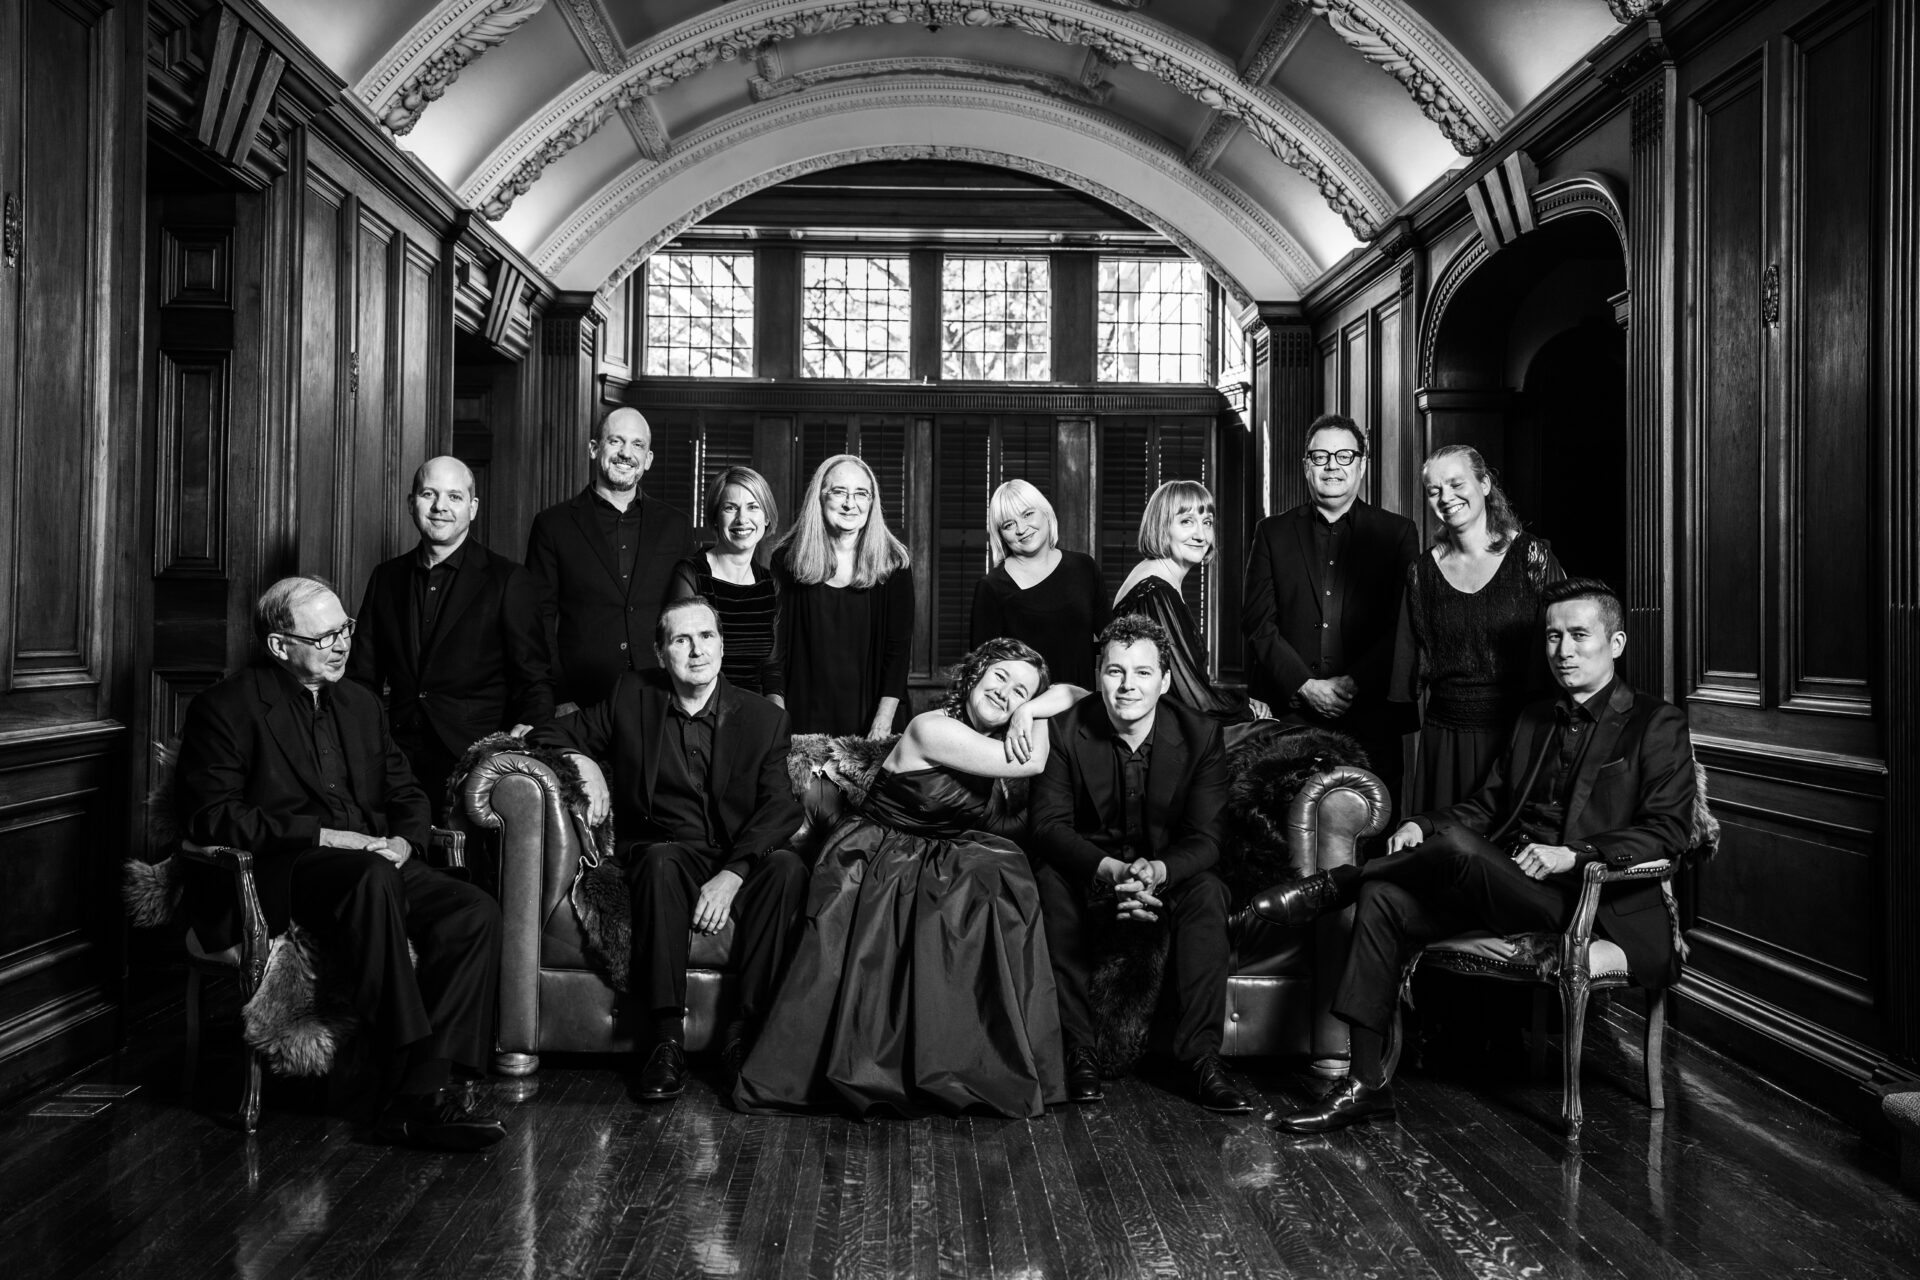 A black and white image of Tafelmusik artists